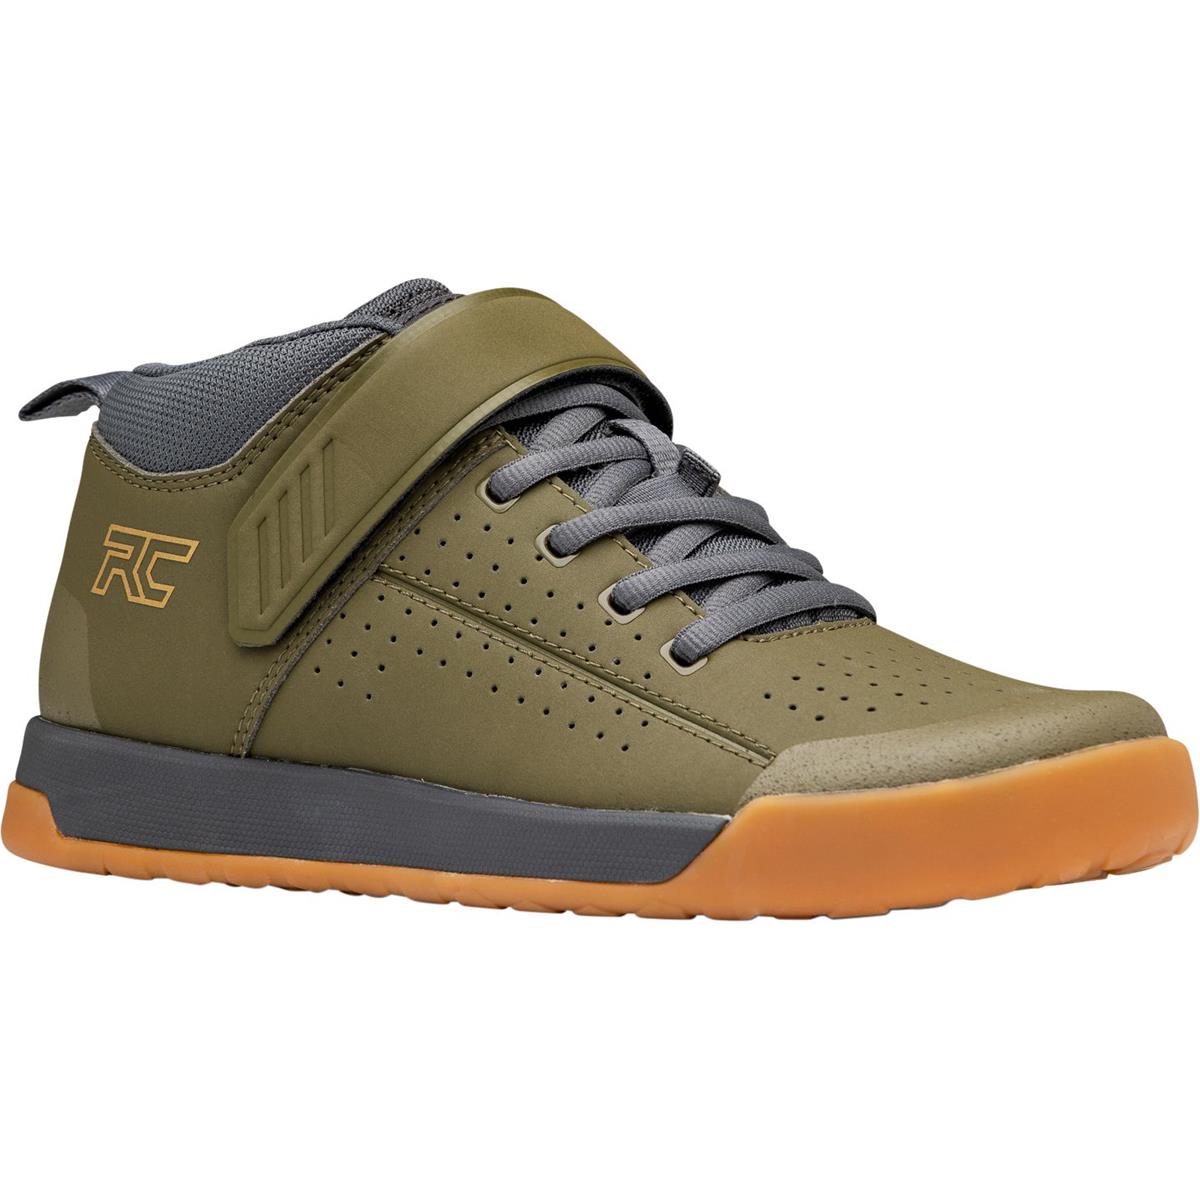 Ride Concepts Girls Bike Shoes Wildcat Olive/Cargo